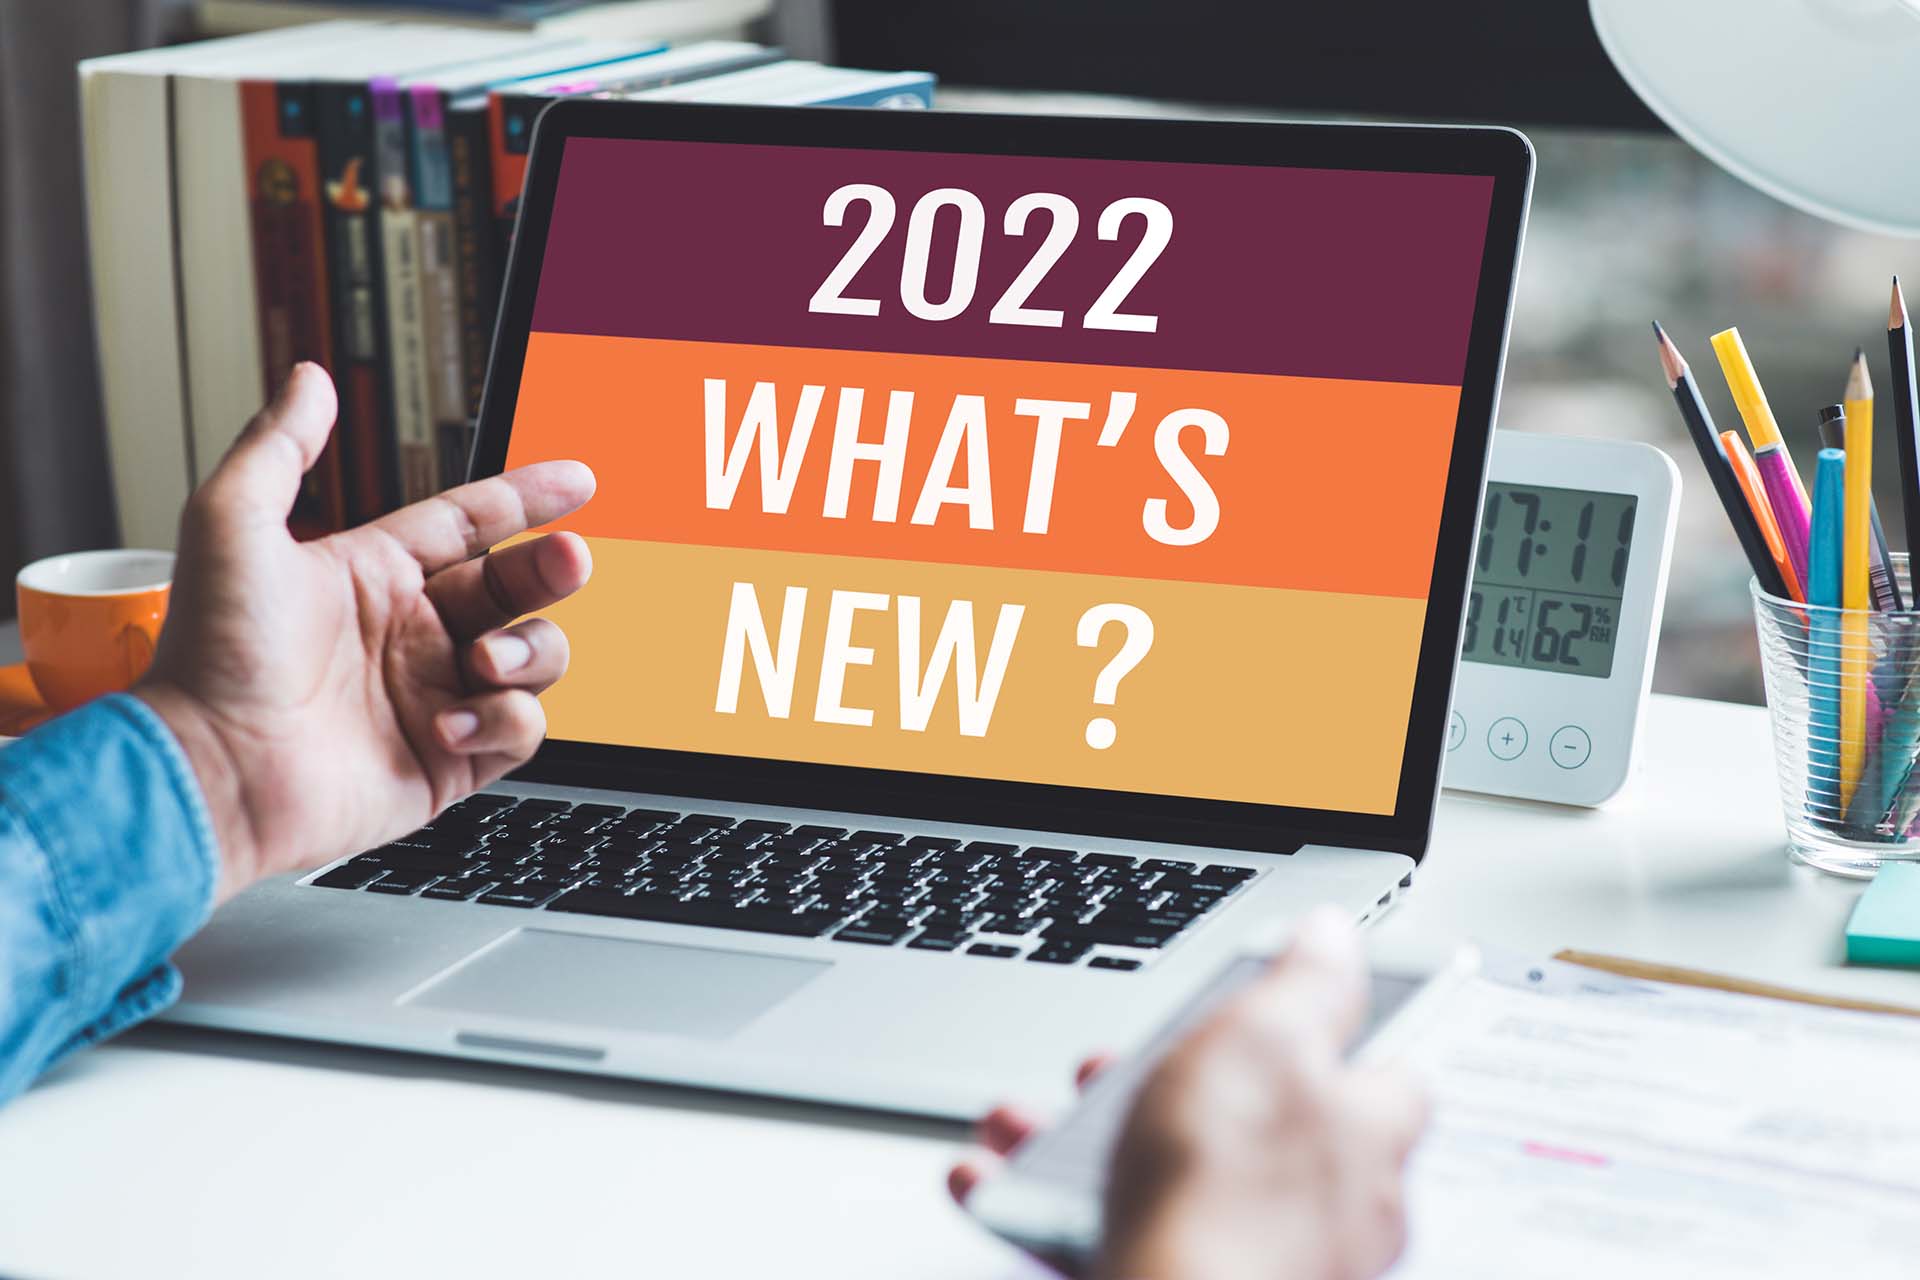 What's new for 2022?